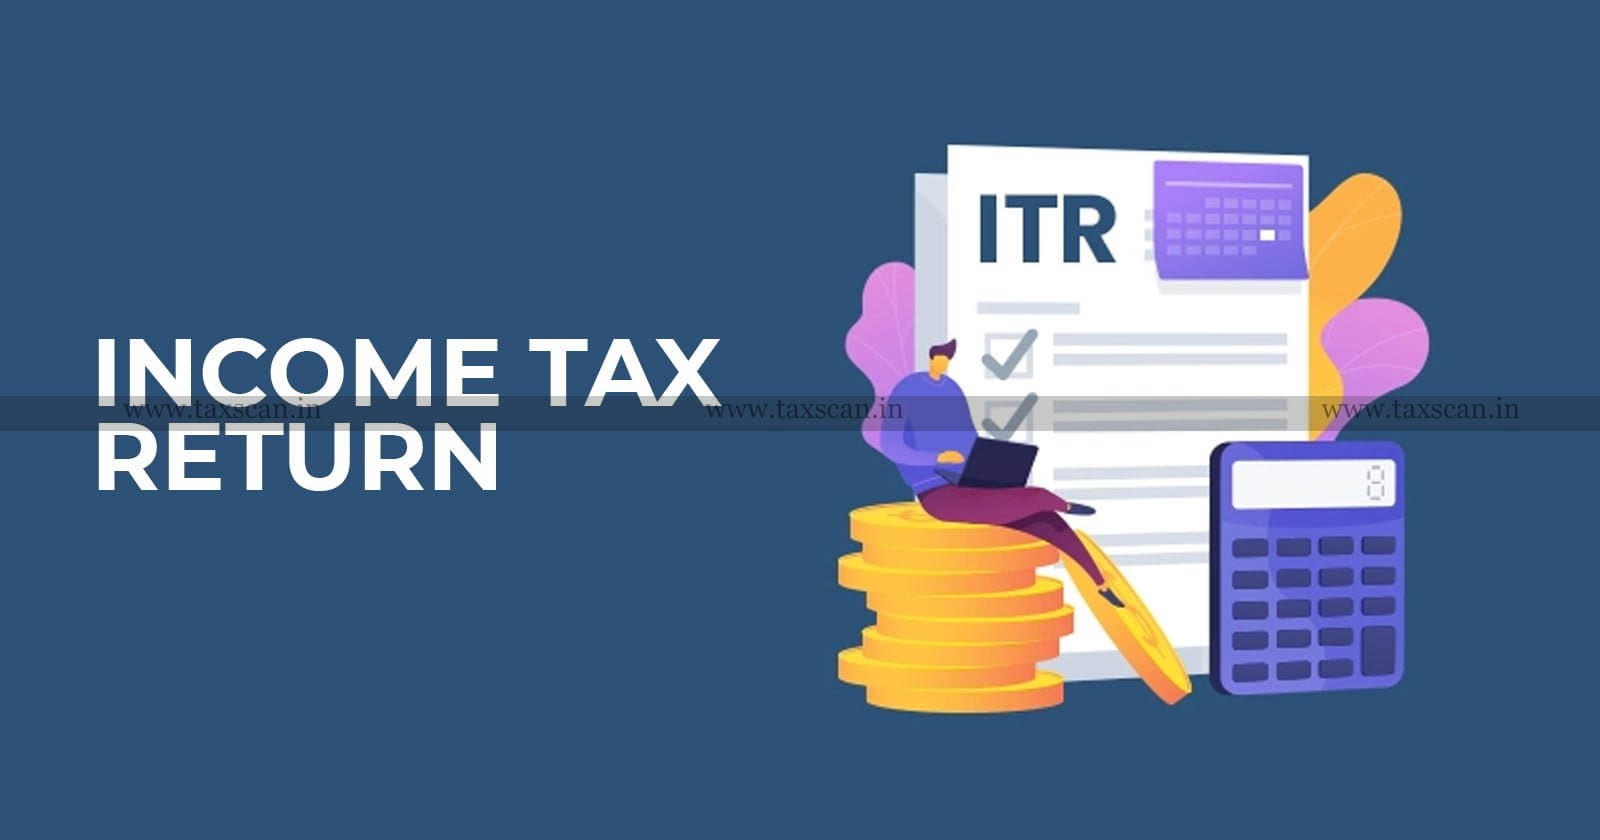 Tax - Appellate - Tribunal - interest - property - Expenditure - ITR - Income tax return - taxscan